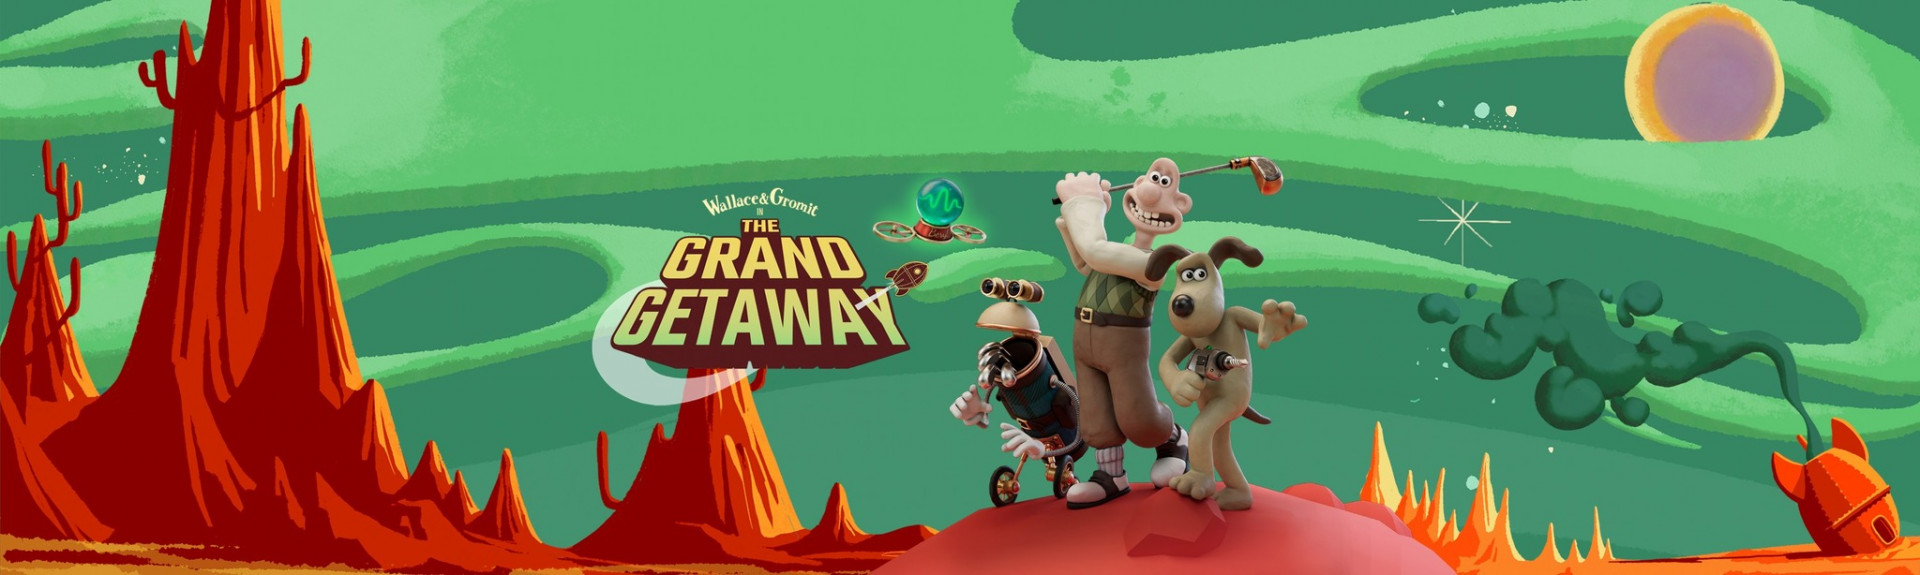 Wallace & Gromit in The Grand Getaway: ANÁLISIS